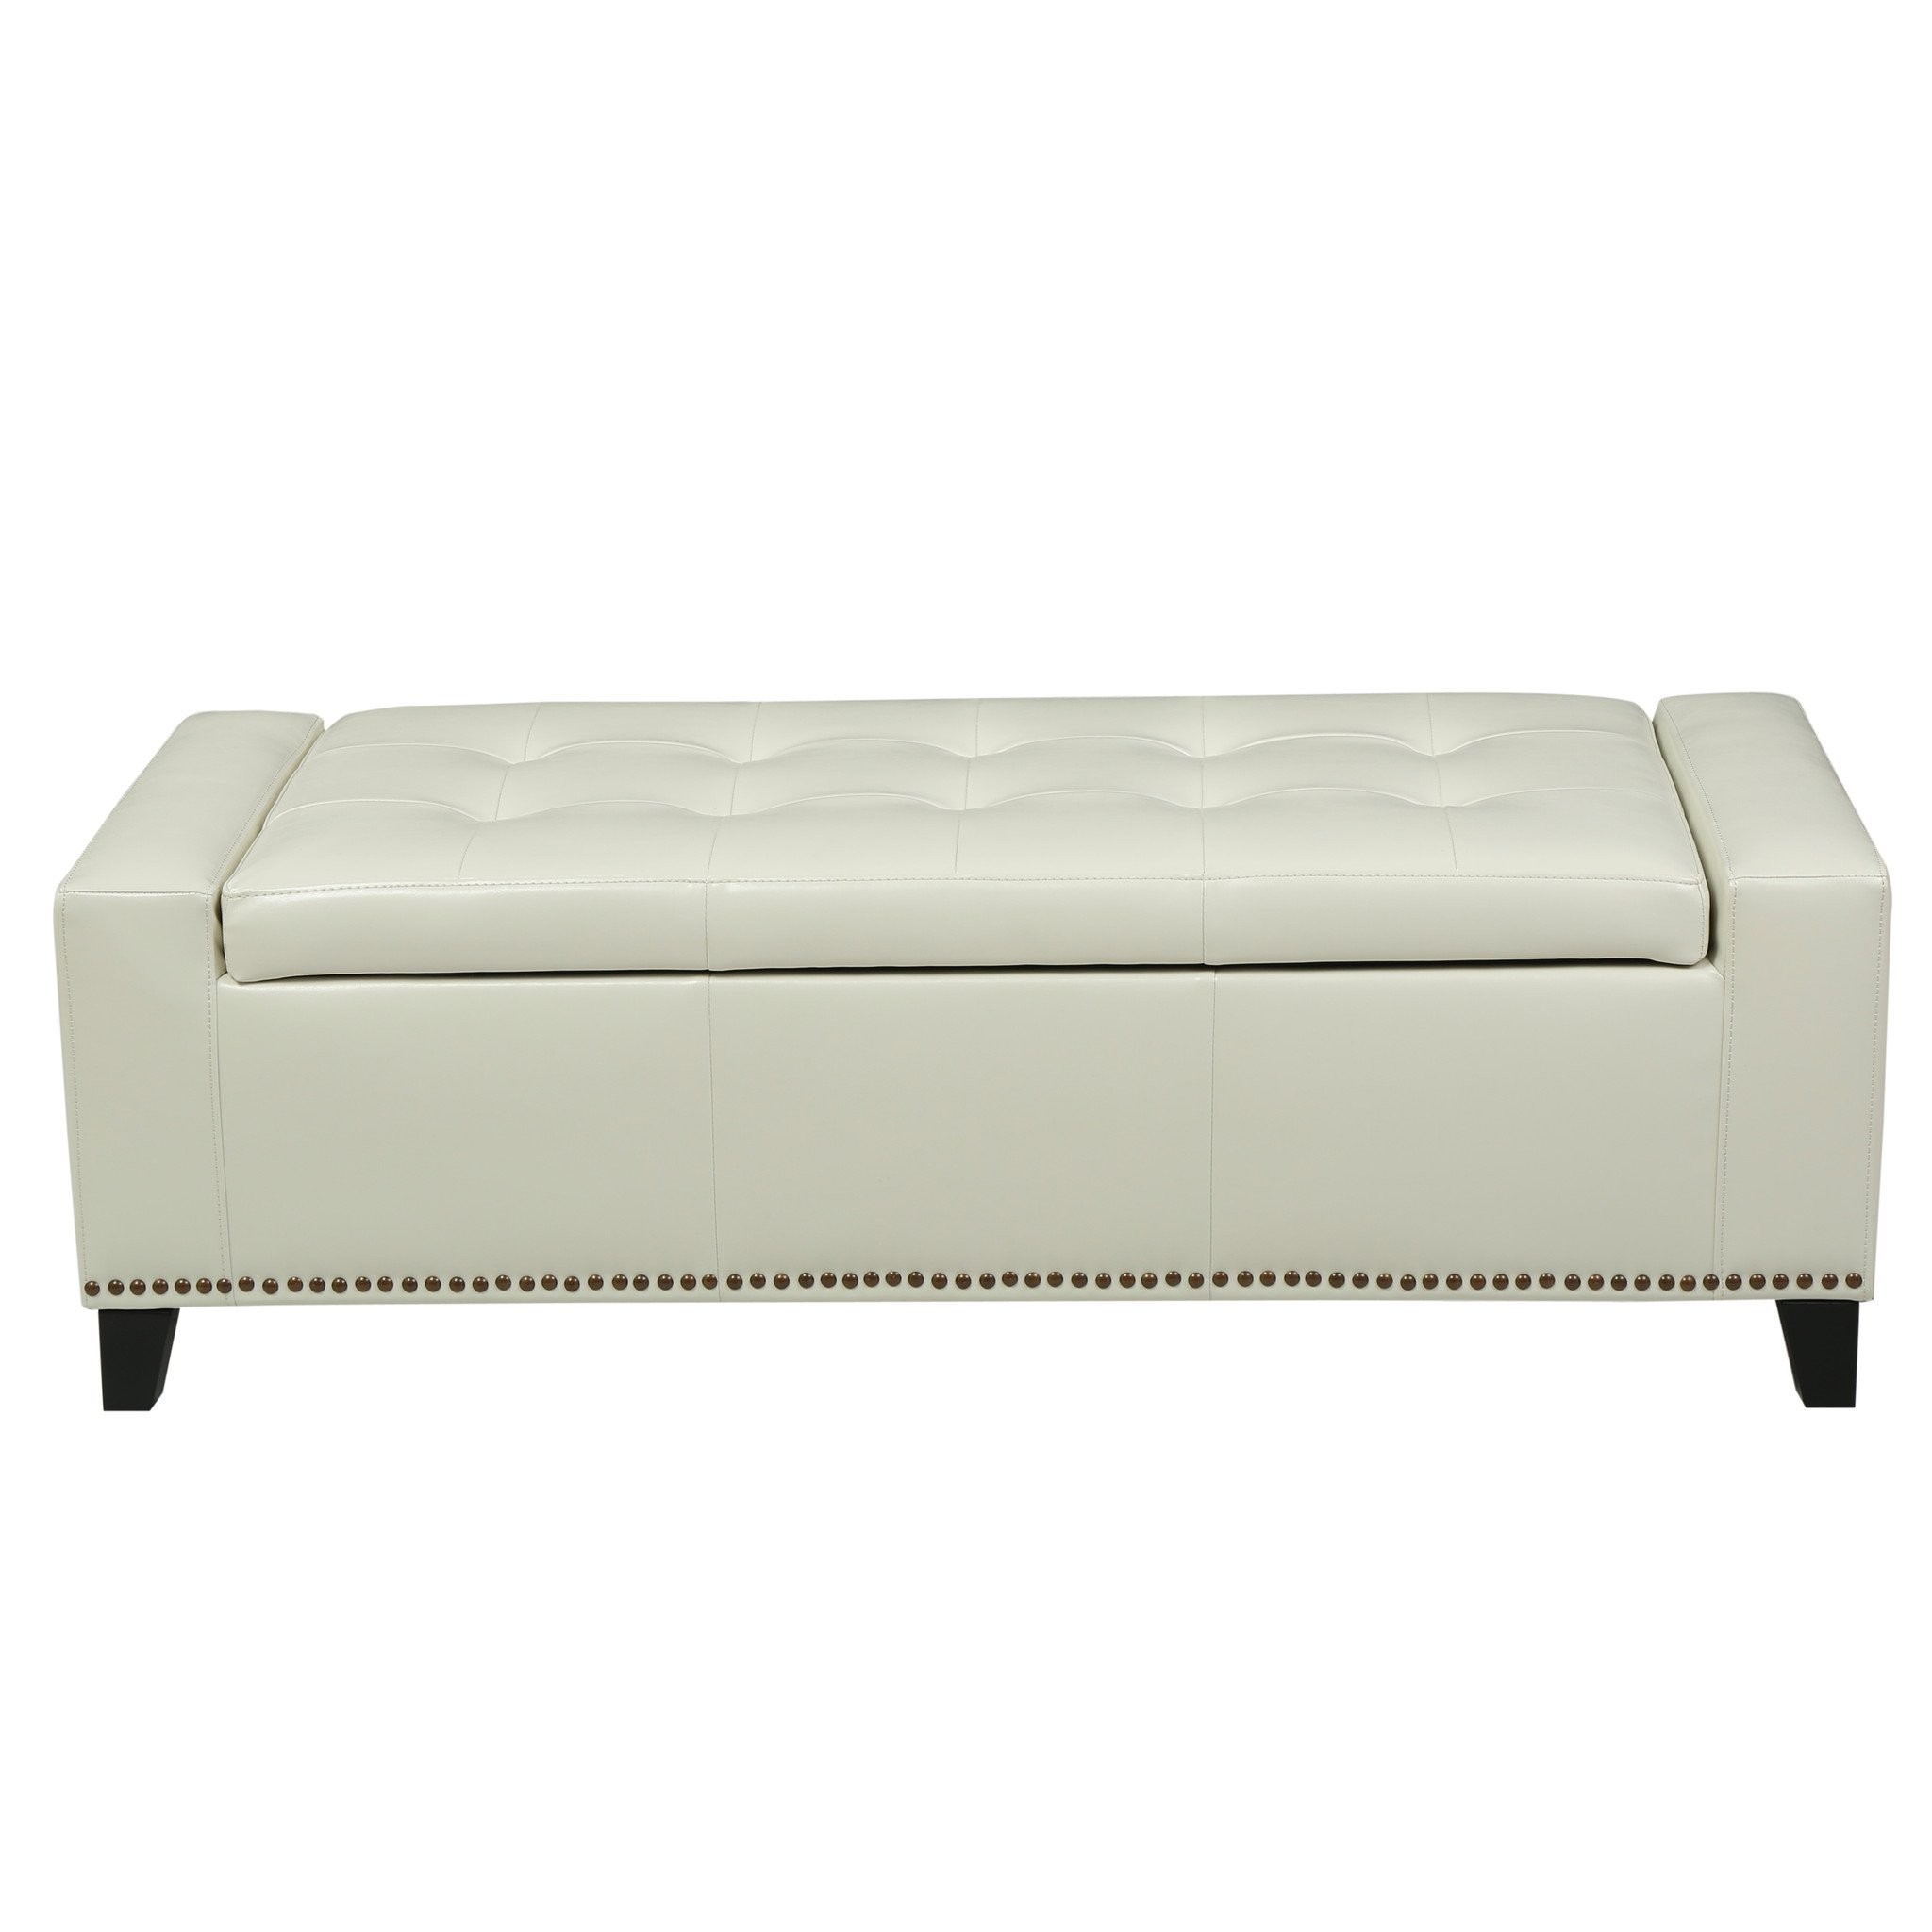 Robin Studded Off-White Leather Storage Ottoman Be...